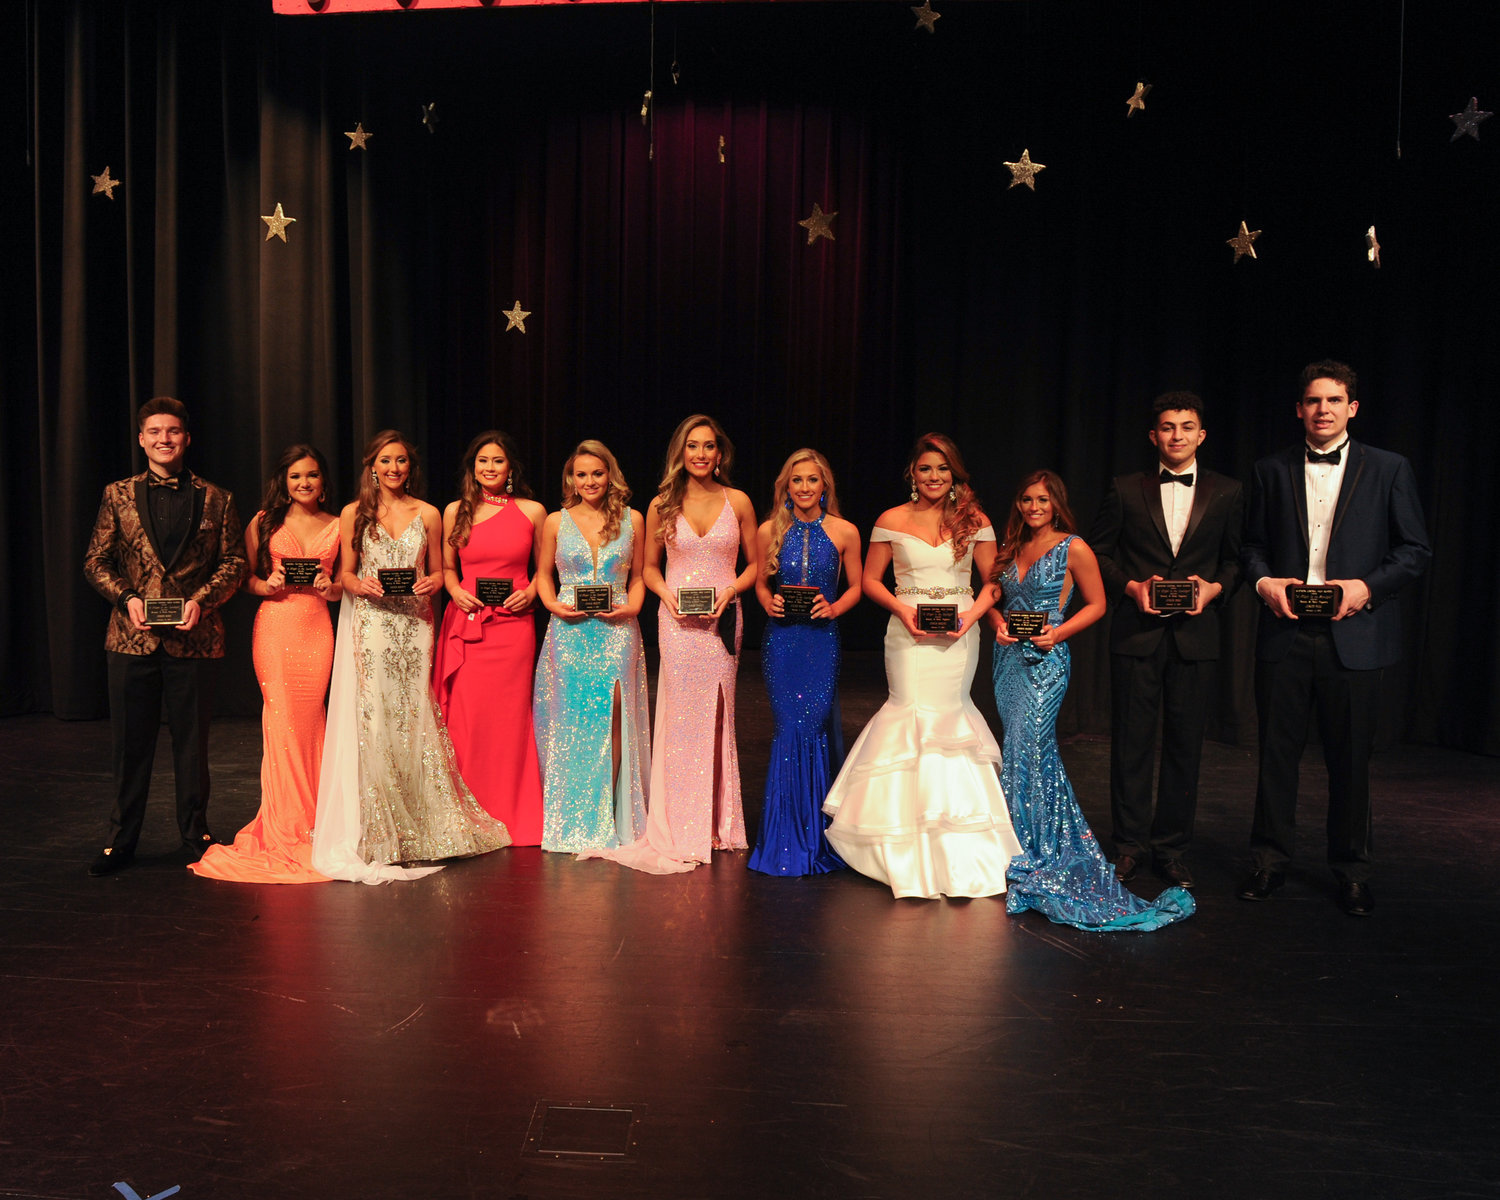 Madison Central High School hosted its annual Beauty and Beau pageant the week of February 8. Thursday, February 11 was junior night. Pictured are the winners. Left to right are beau Simon Tipton, Nora Beth Thomas, Ann Travis Hutchinson, Sarah Kate Killens, Annalise Ferrell, Kendall Starkey, Leighton Barrett, Abby Gables, Maddie Rives, beaus Youssef Tuwahni and Mack Gorton.